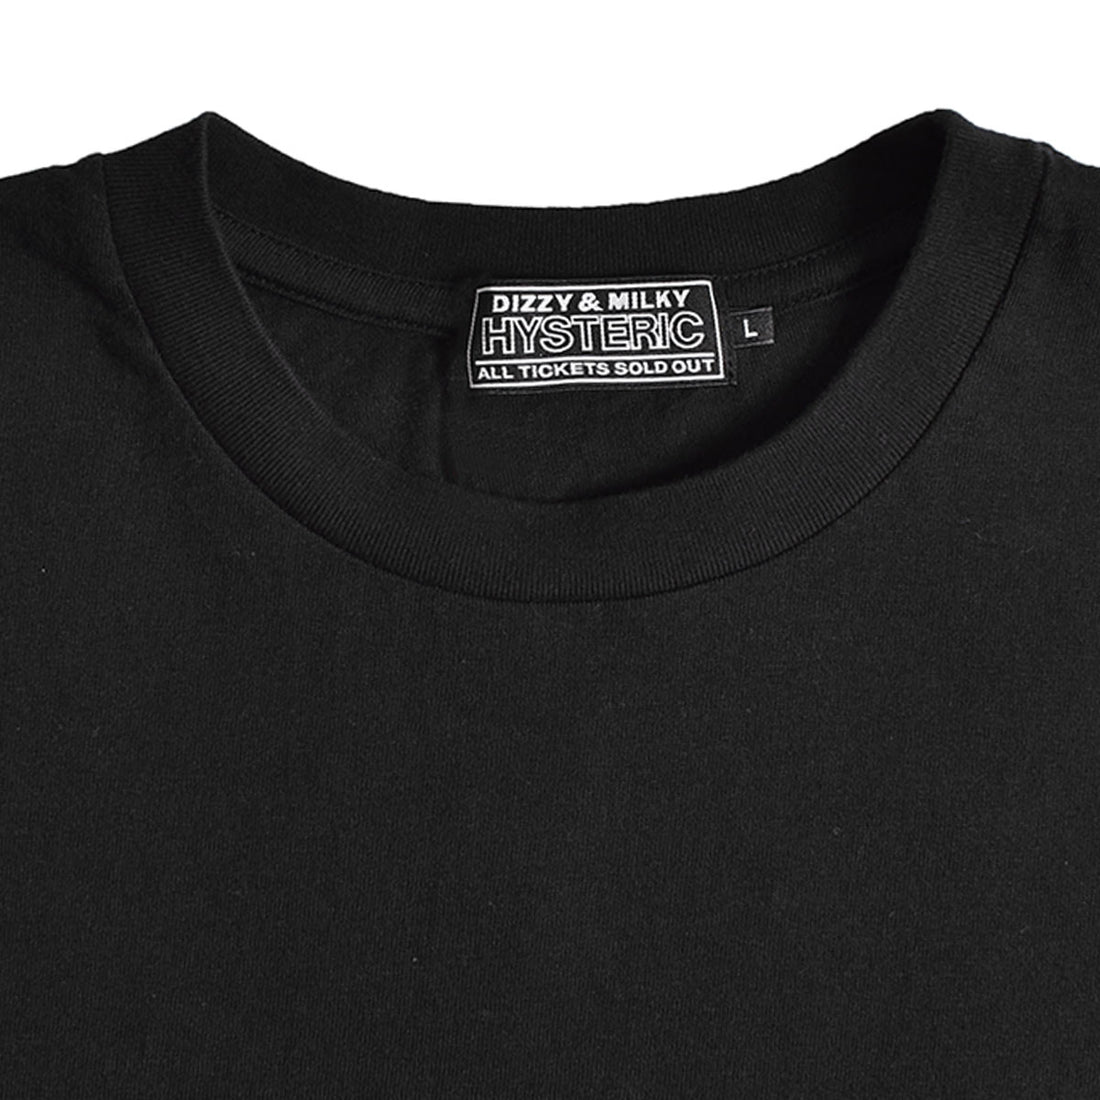 [HYSTERIC GLAMOUR]ALWAYS GOOD TIME Tシャツ/BLACK(02231CT16)